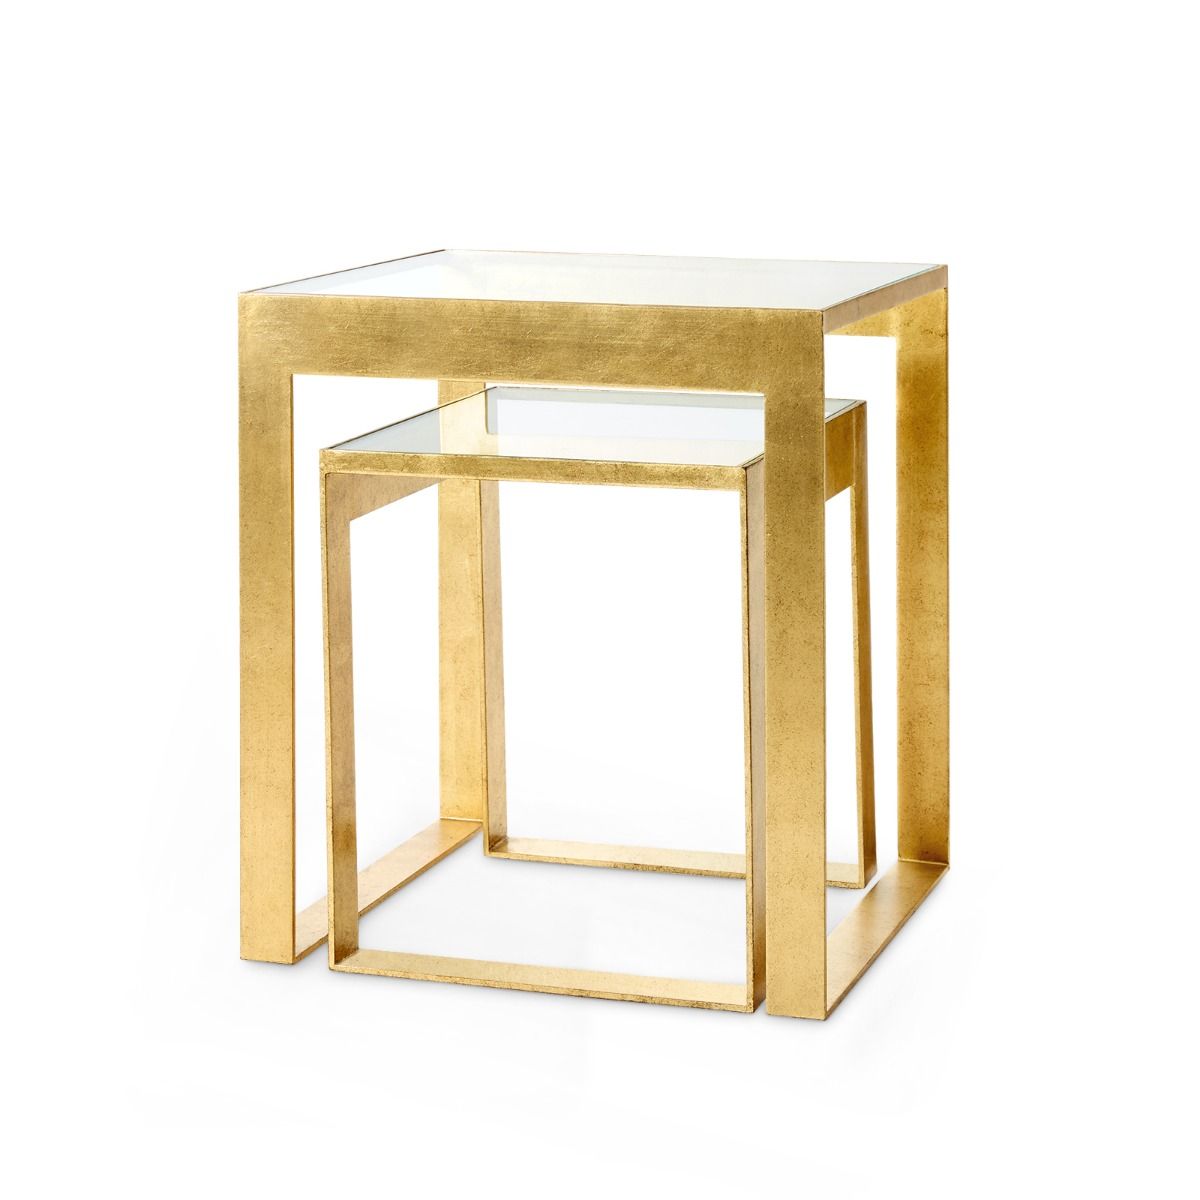 Plano Gold Side Table, Two-Piece